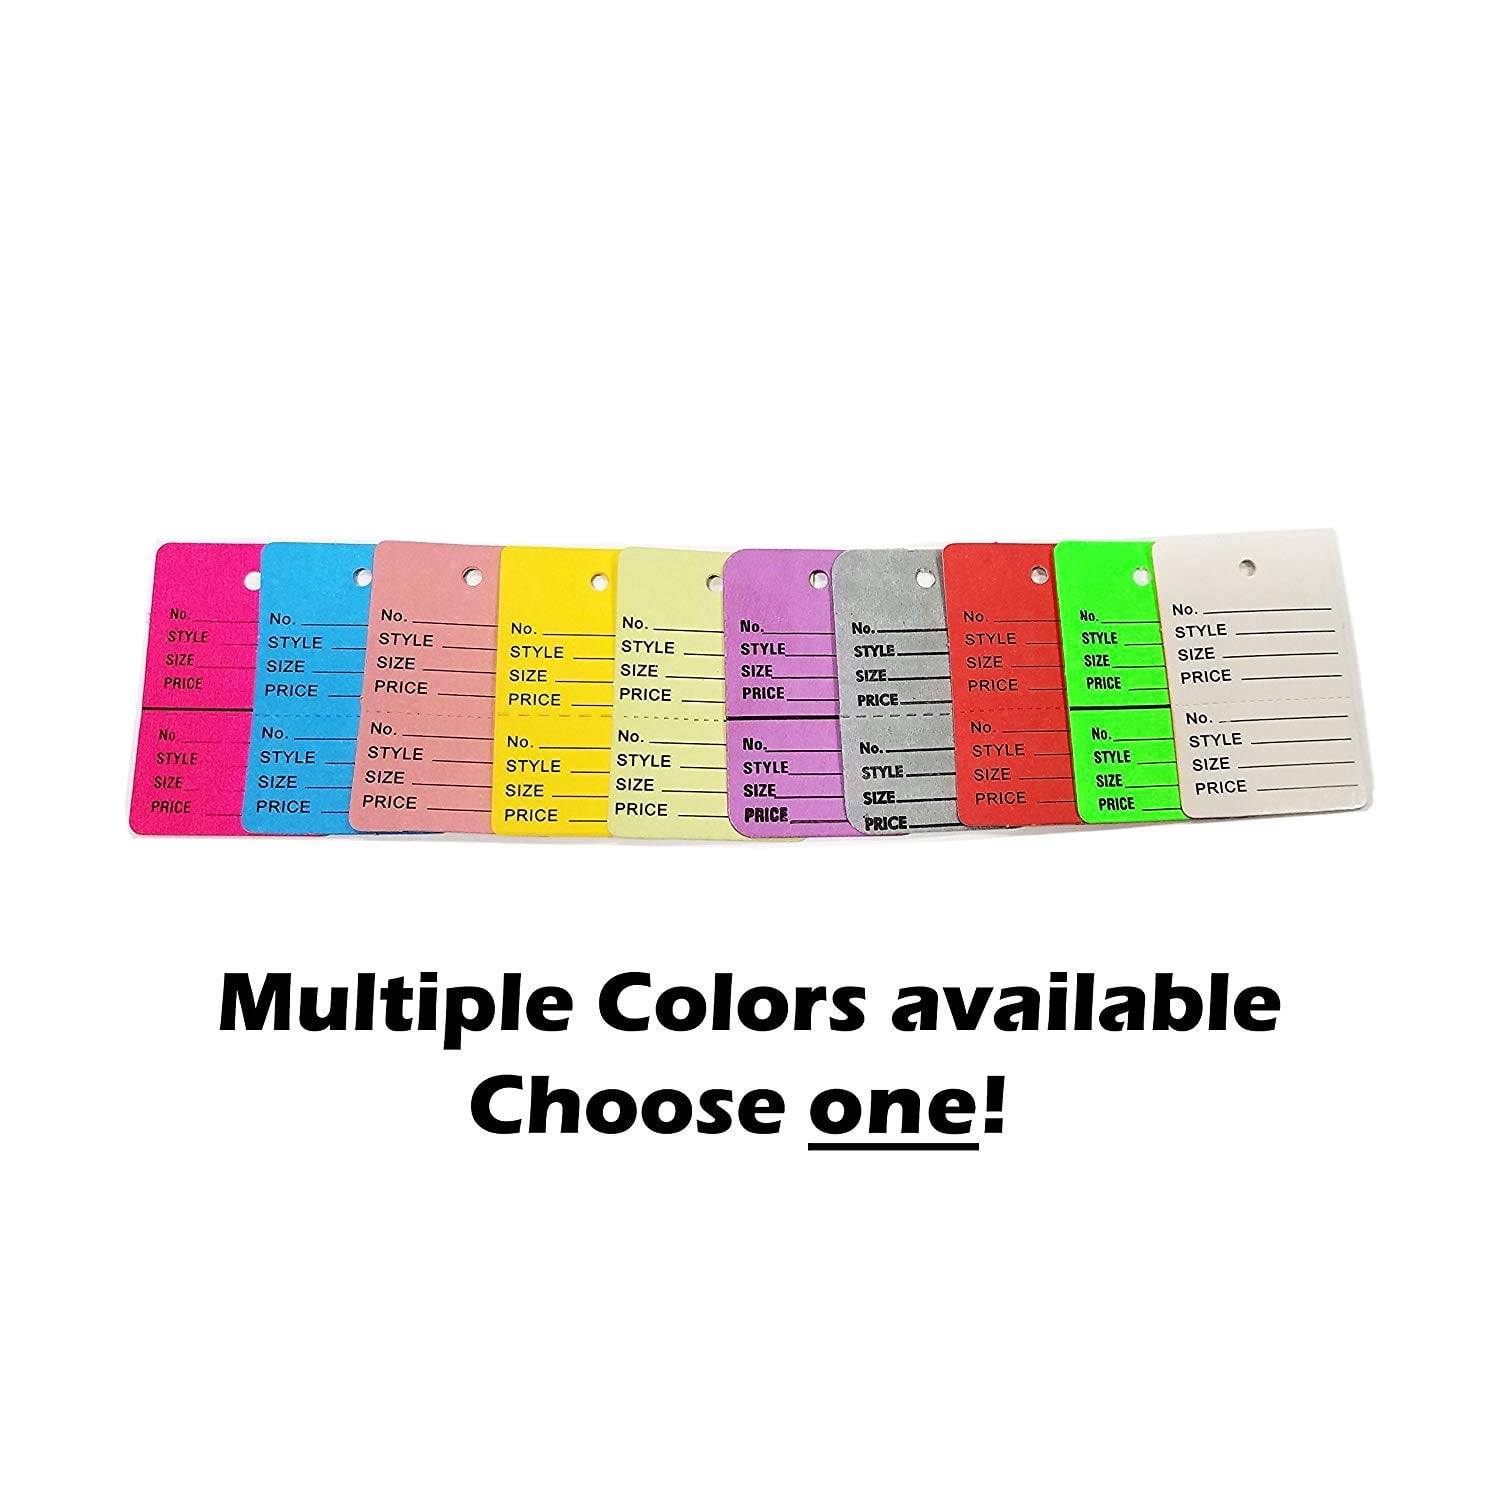 Merchandise Coupon Price Tags without Strings Unstrung Perforated Colors-Sizes 